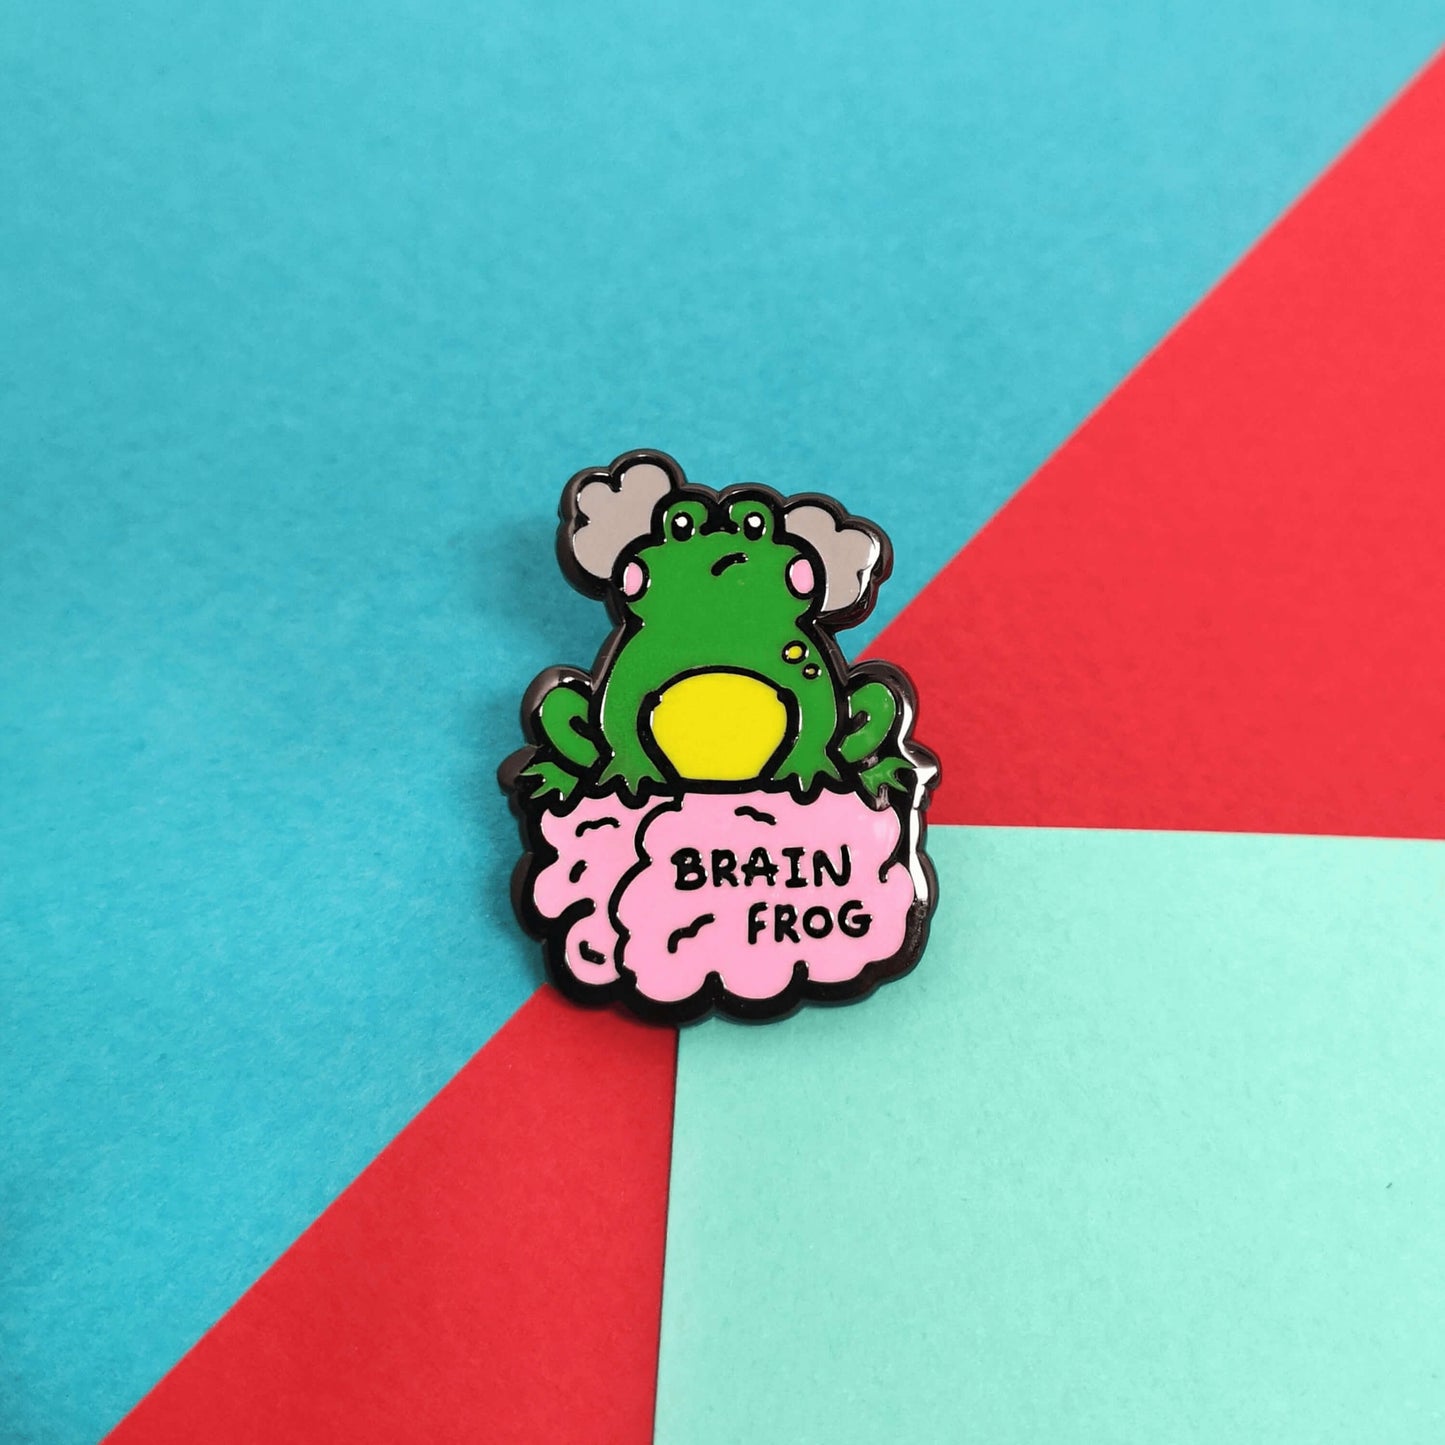 The Brain Frog Enamel Pin - Brain Fog on a red, green and blue background. The pin is of a green frog with pink blush cheeks looking confused with two grey clouds by its head, it is sat on a pink brain with the text reading Brain Frog. The design is raising awareness for brain fog.